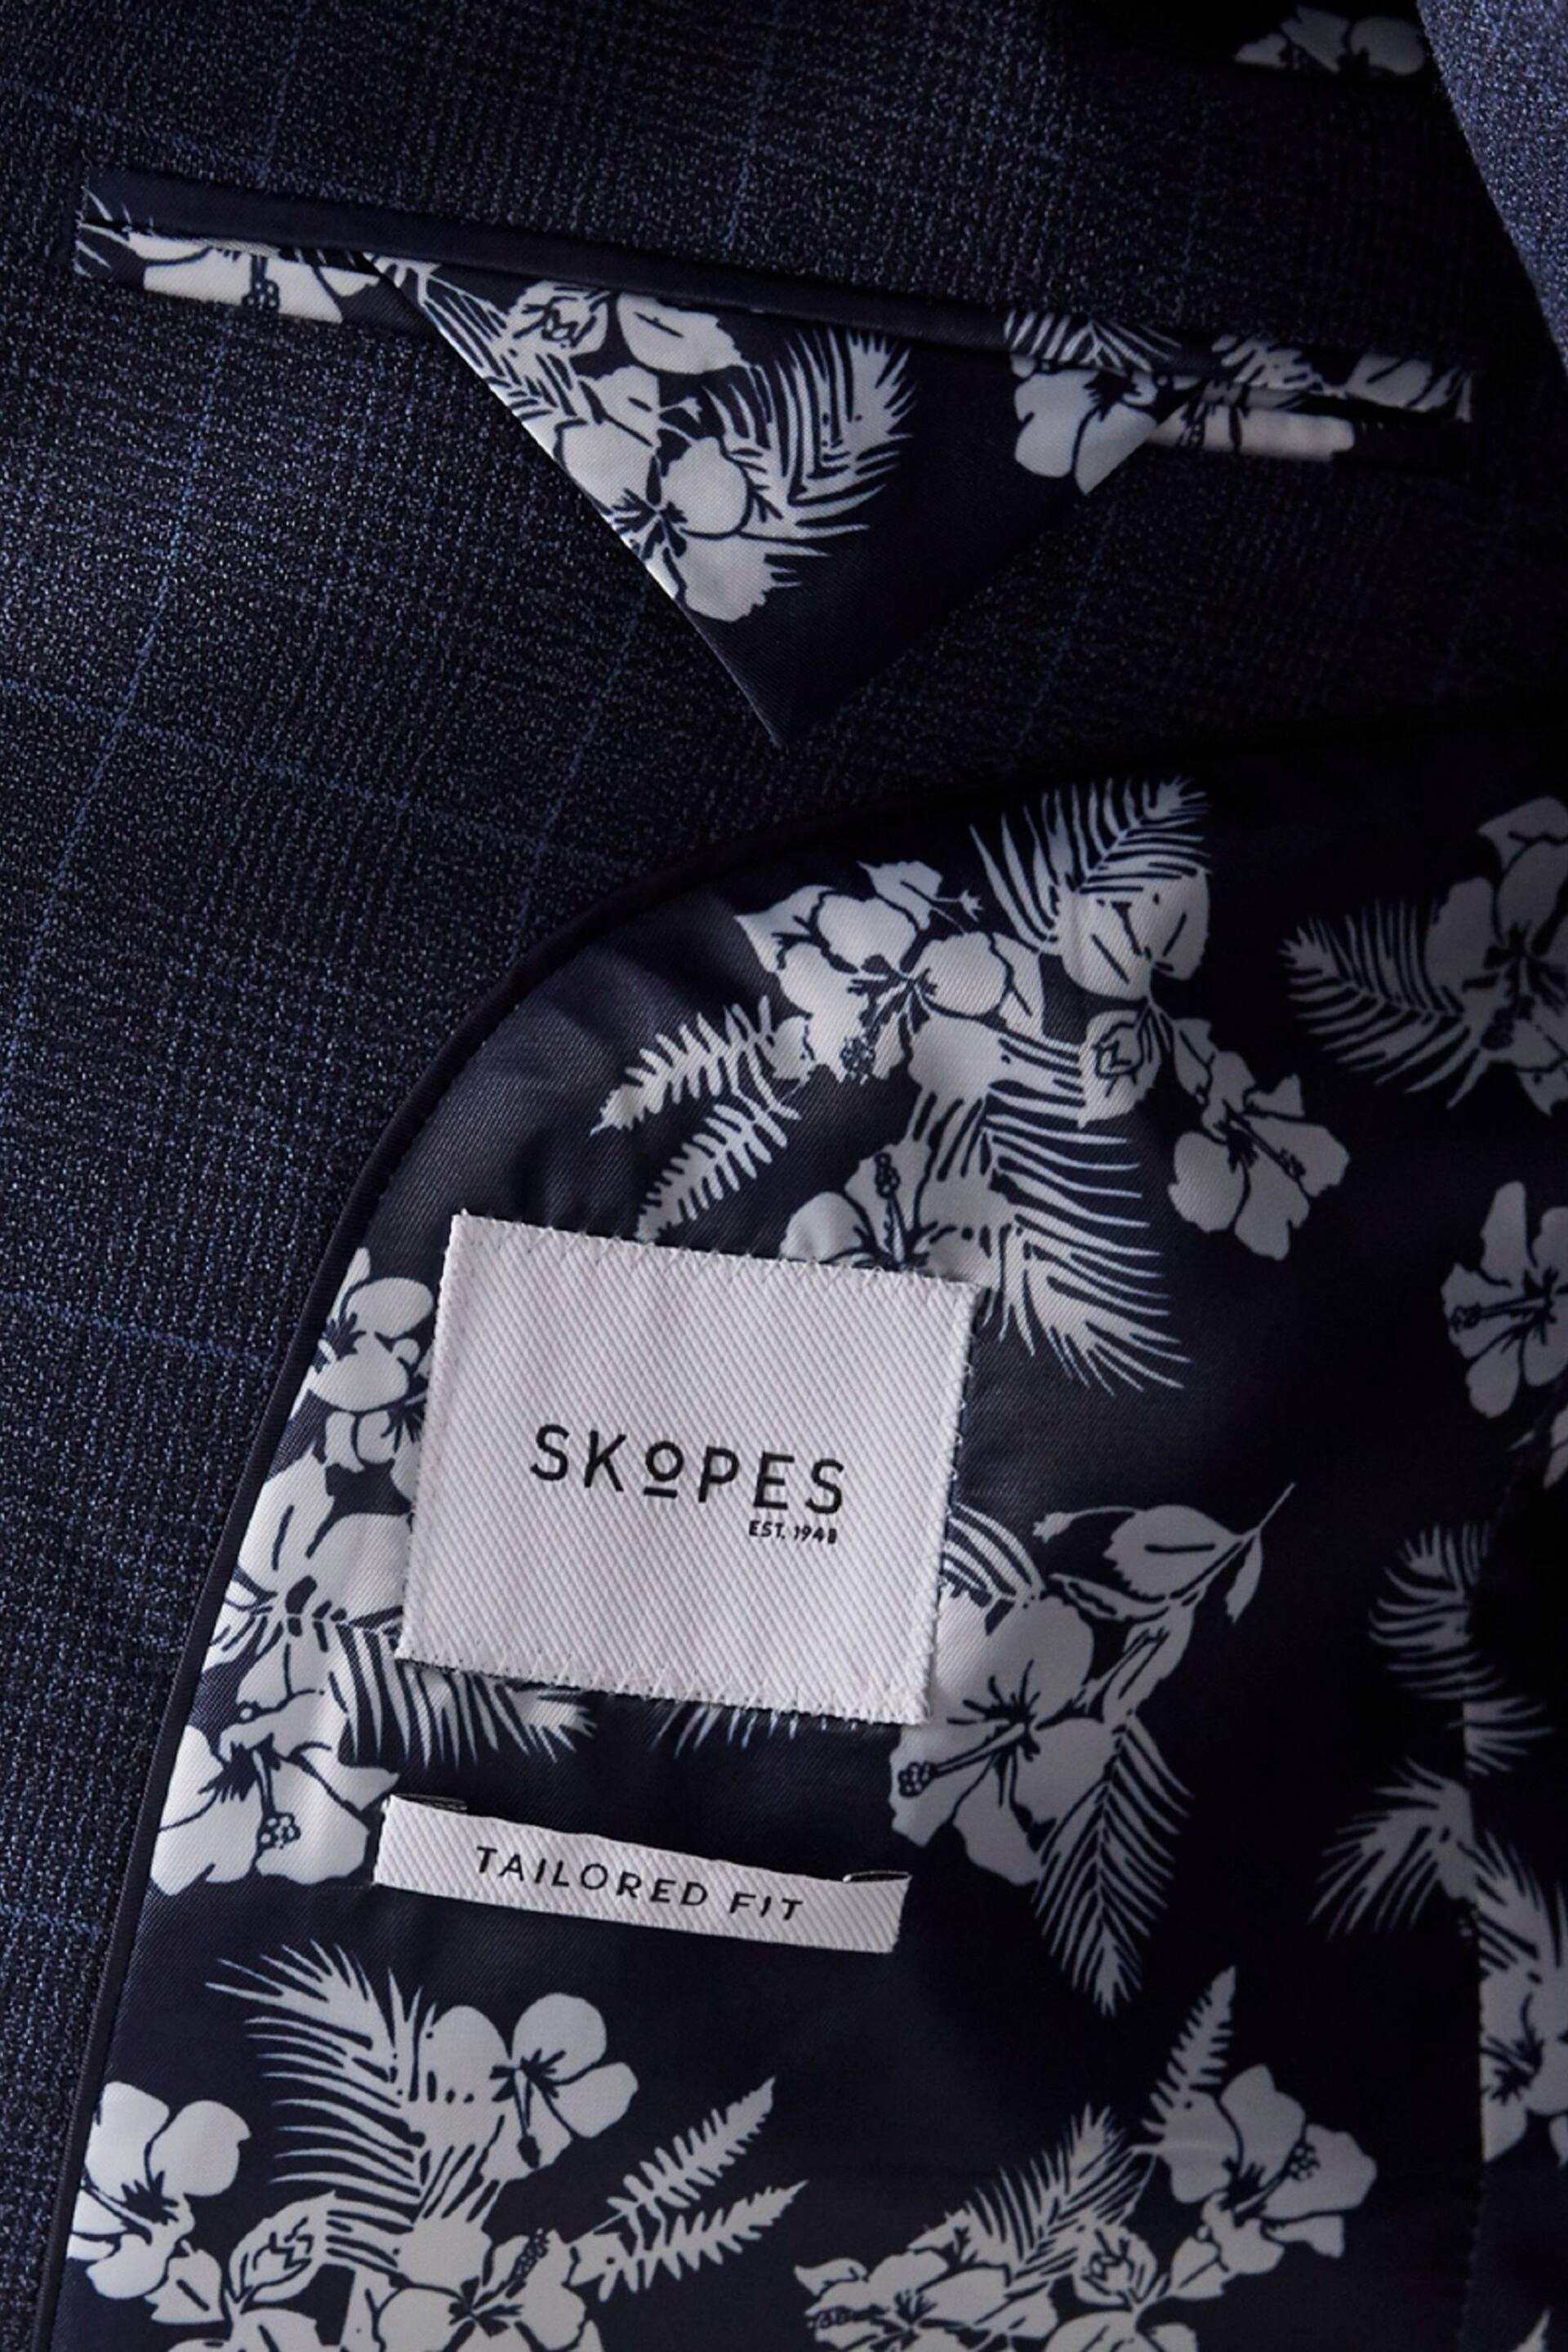 Skopes Anello Check Tailored Fit Suit Jacket - Image 4 of 4